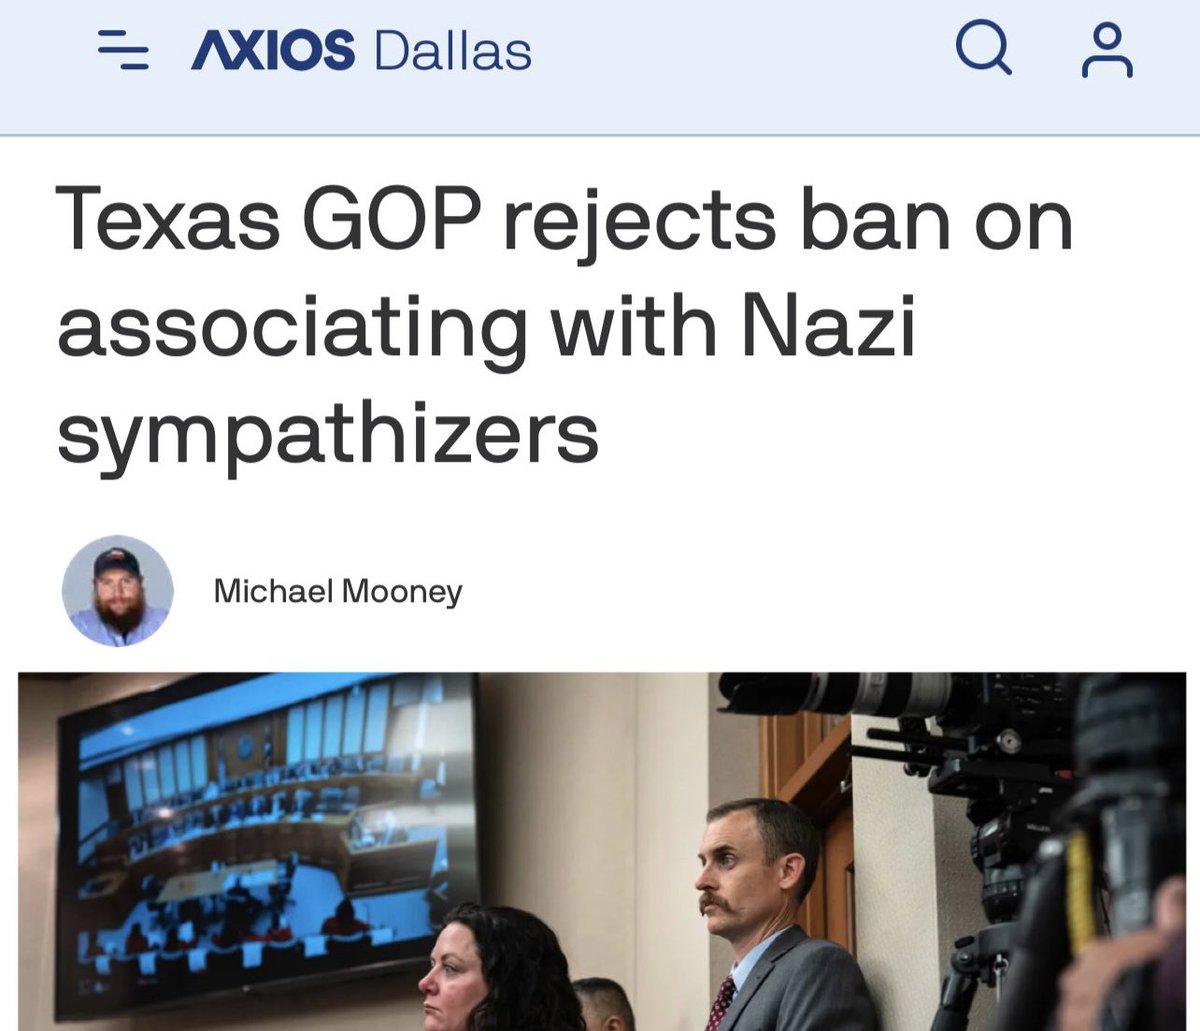 Ted Cruz and Greg Abbott are trying really hard to make it seem like they care about antisemitism.